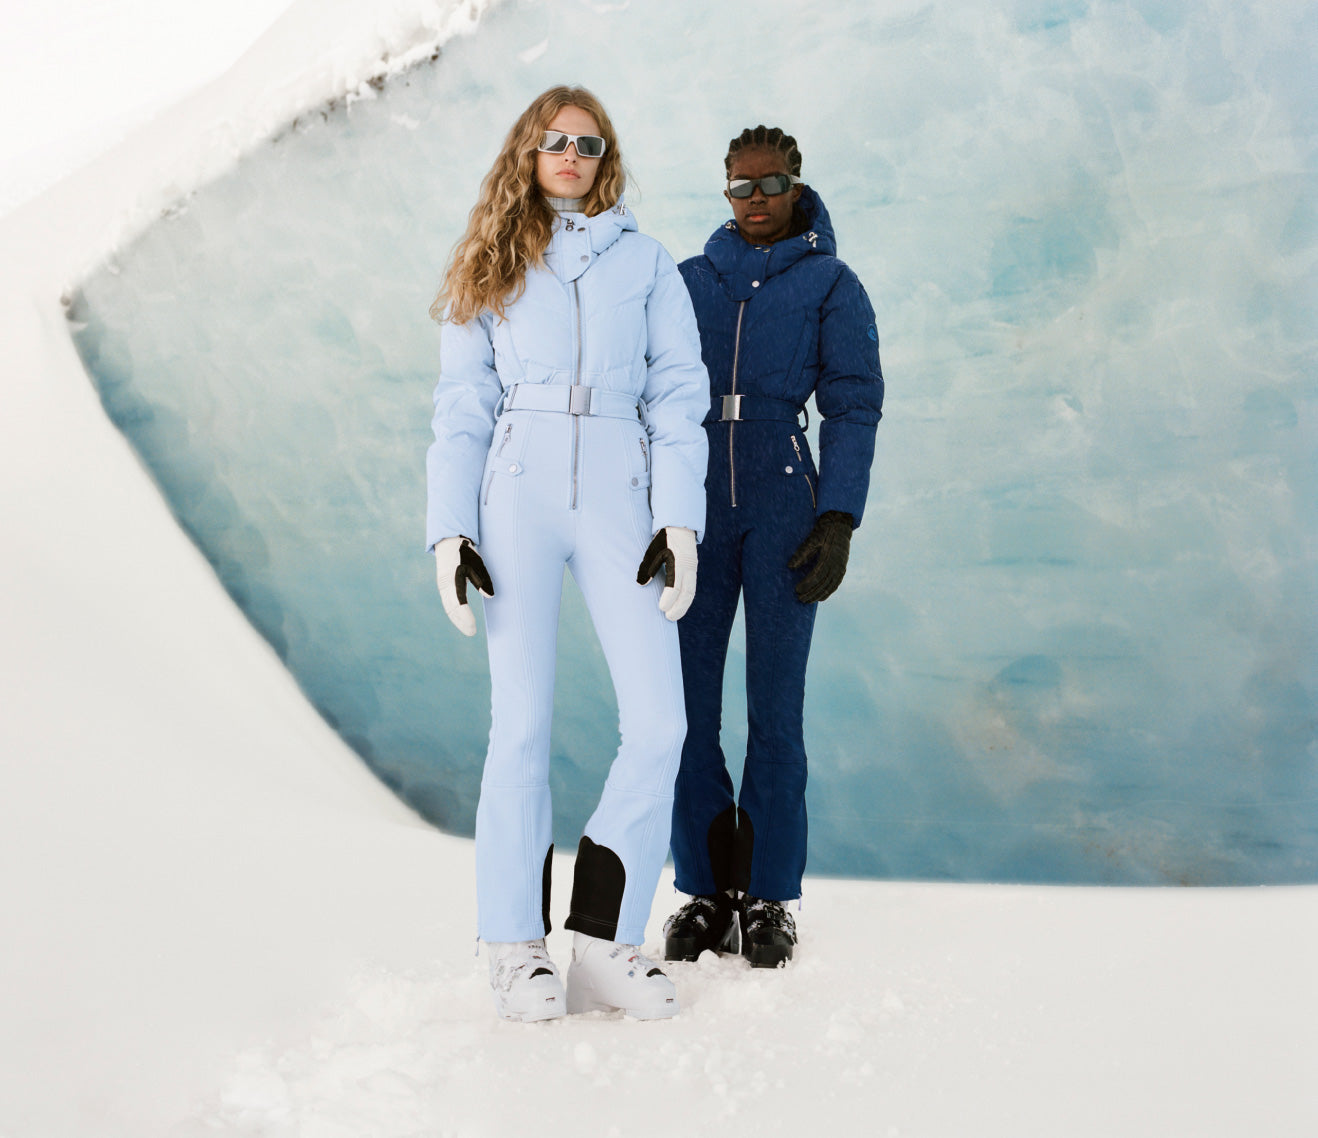 Best Women's Ski Clothes & Cute Ski Outfits [UPDATED 2023] 